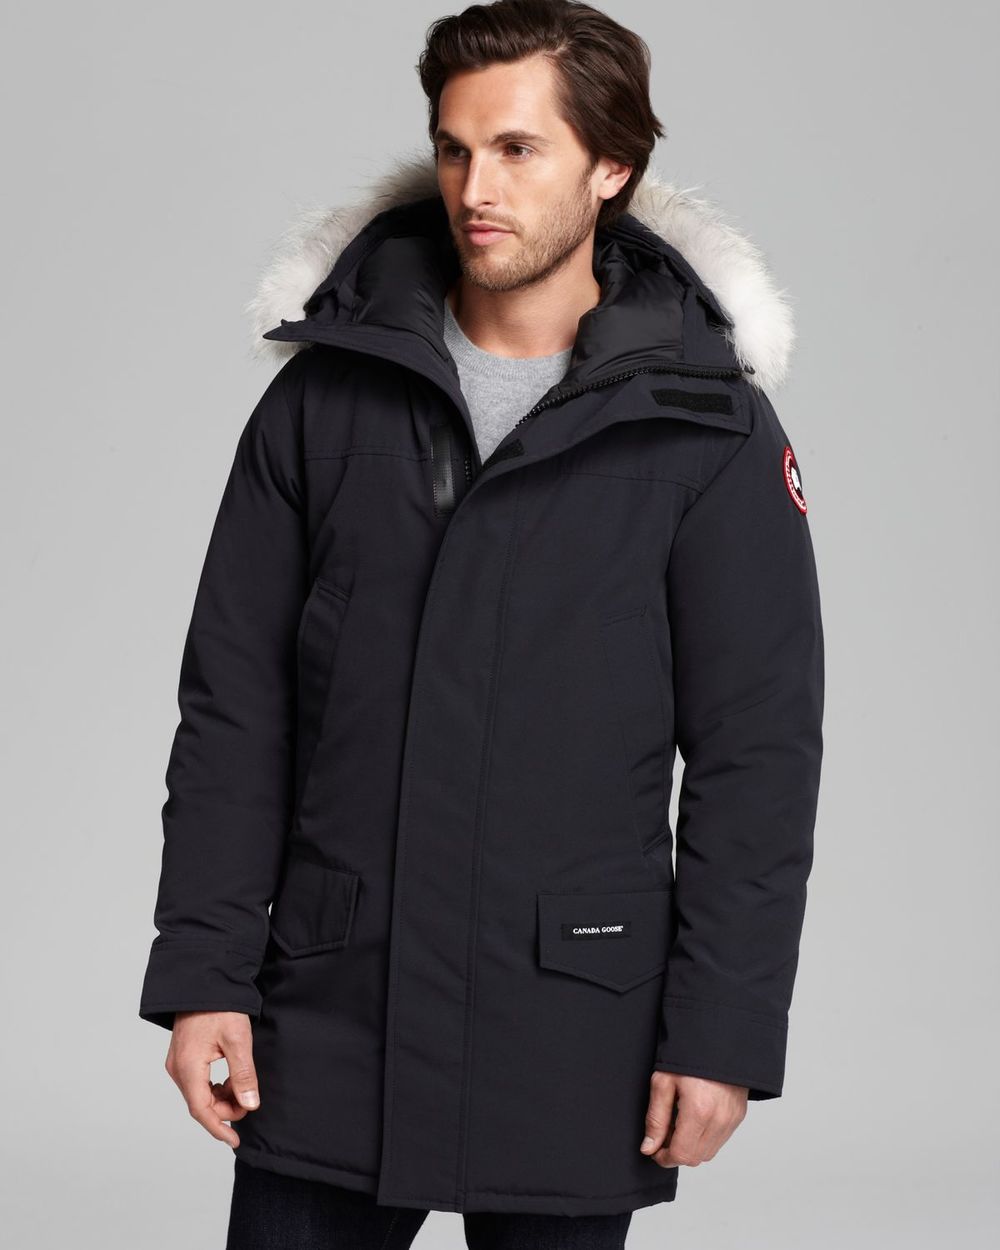 cheapest place buy canada goose toronto